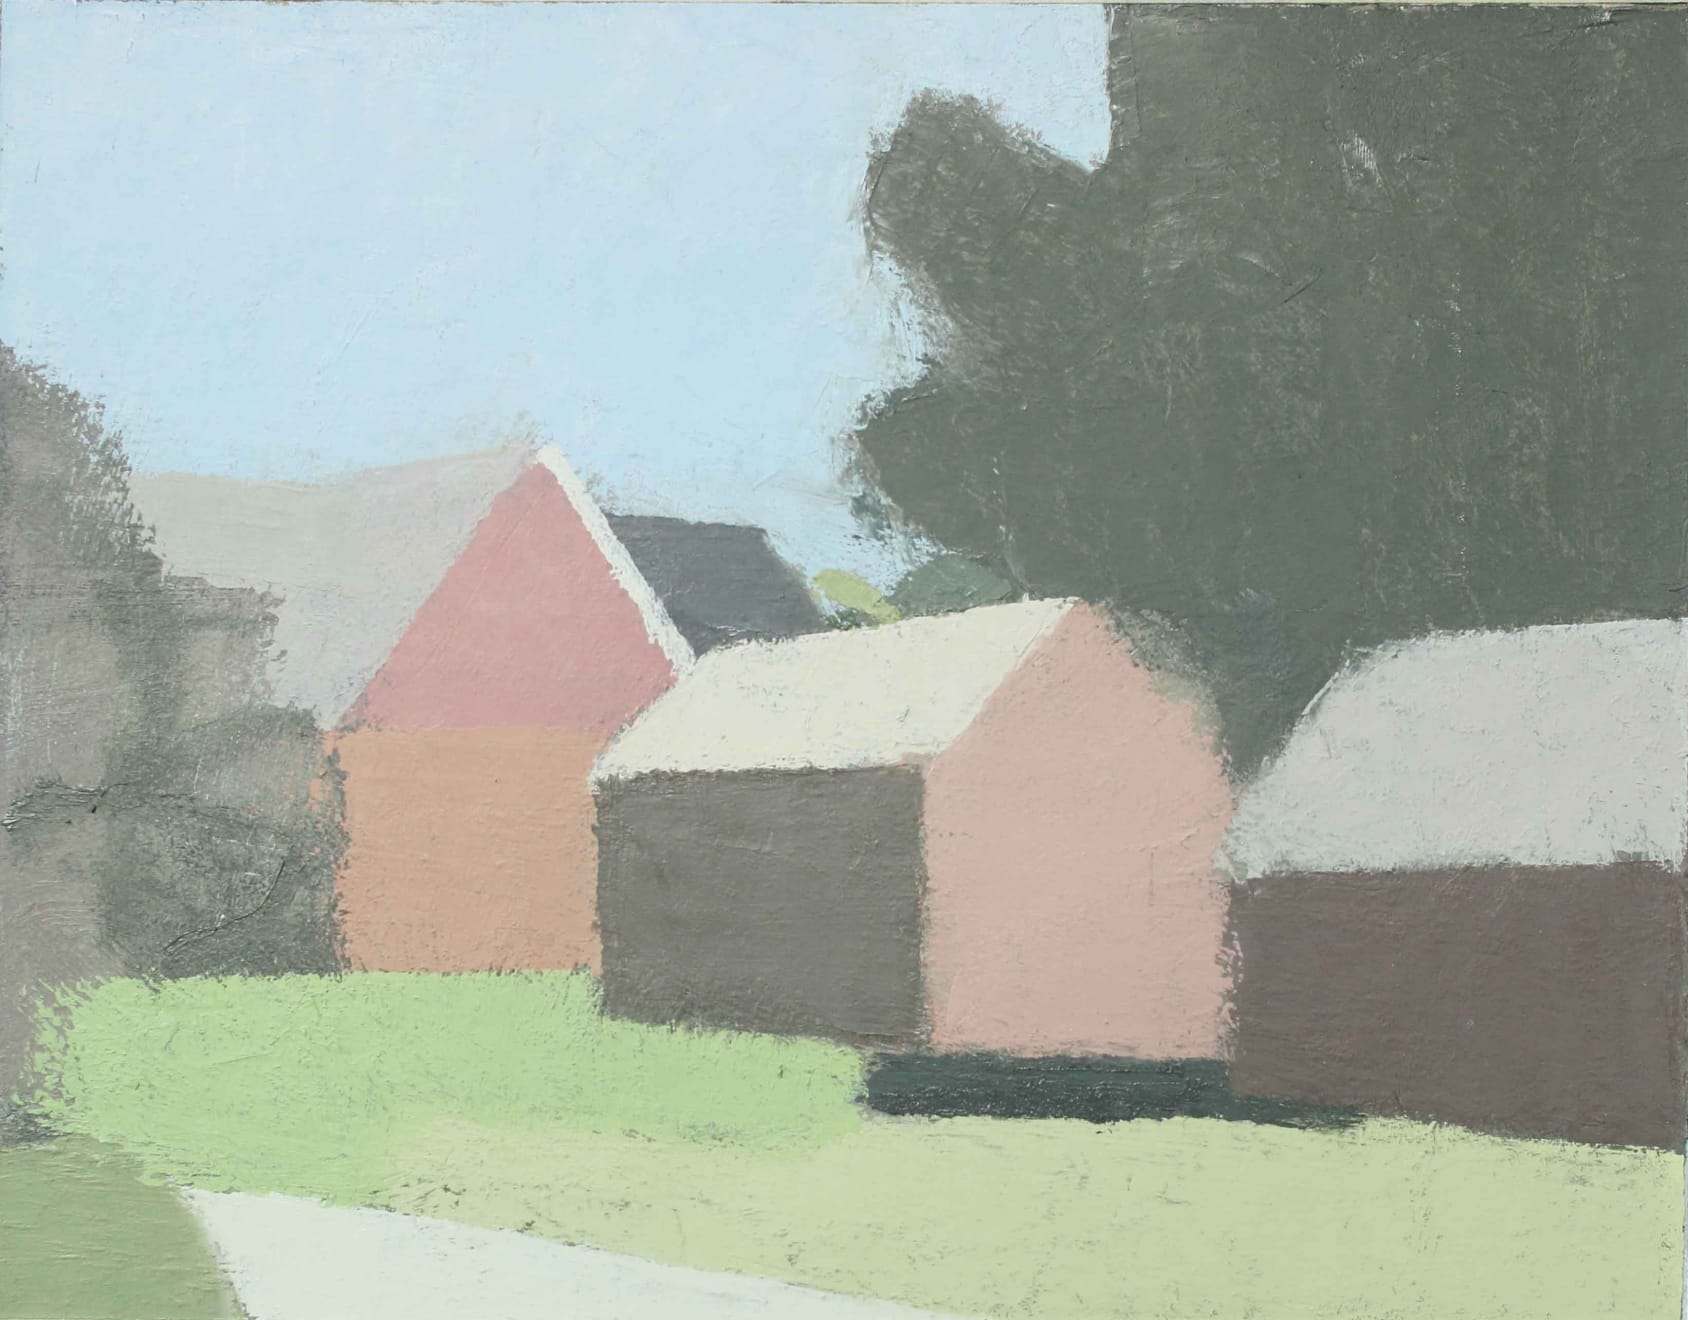 LAURA VAHLBERG THREE HOUSES ON A HILL Oil on Canvas Board 19 x 24cm $2200